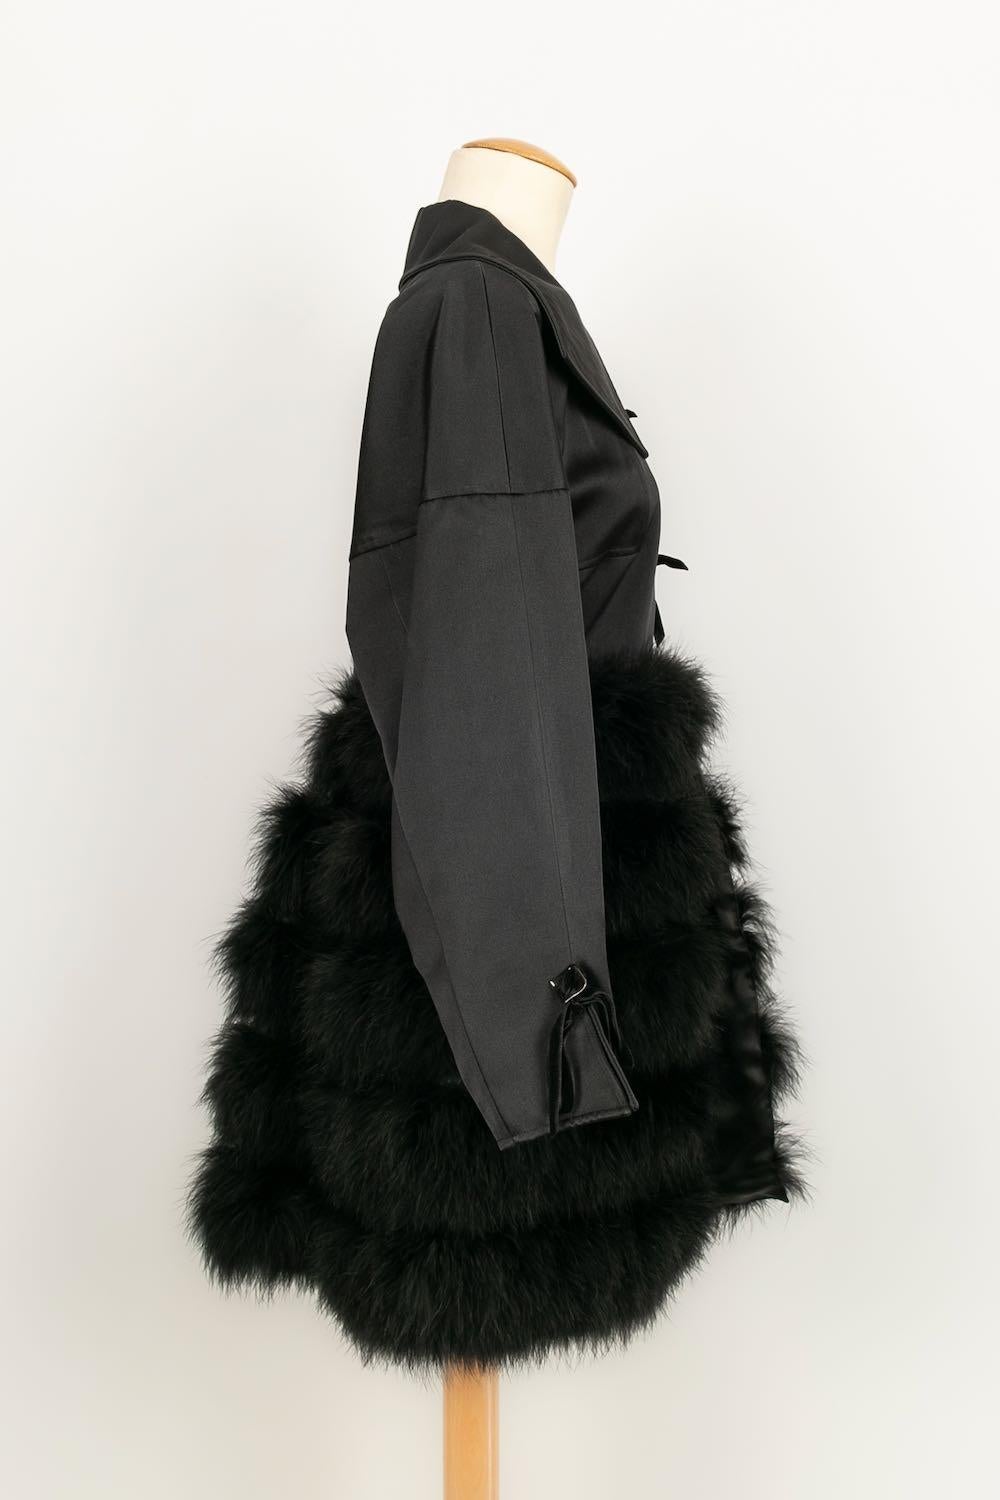 Women's Claude Montana Black Satin and Marabou Feather Coat, 1993 For Sale